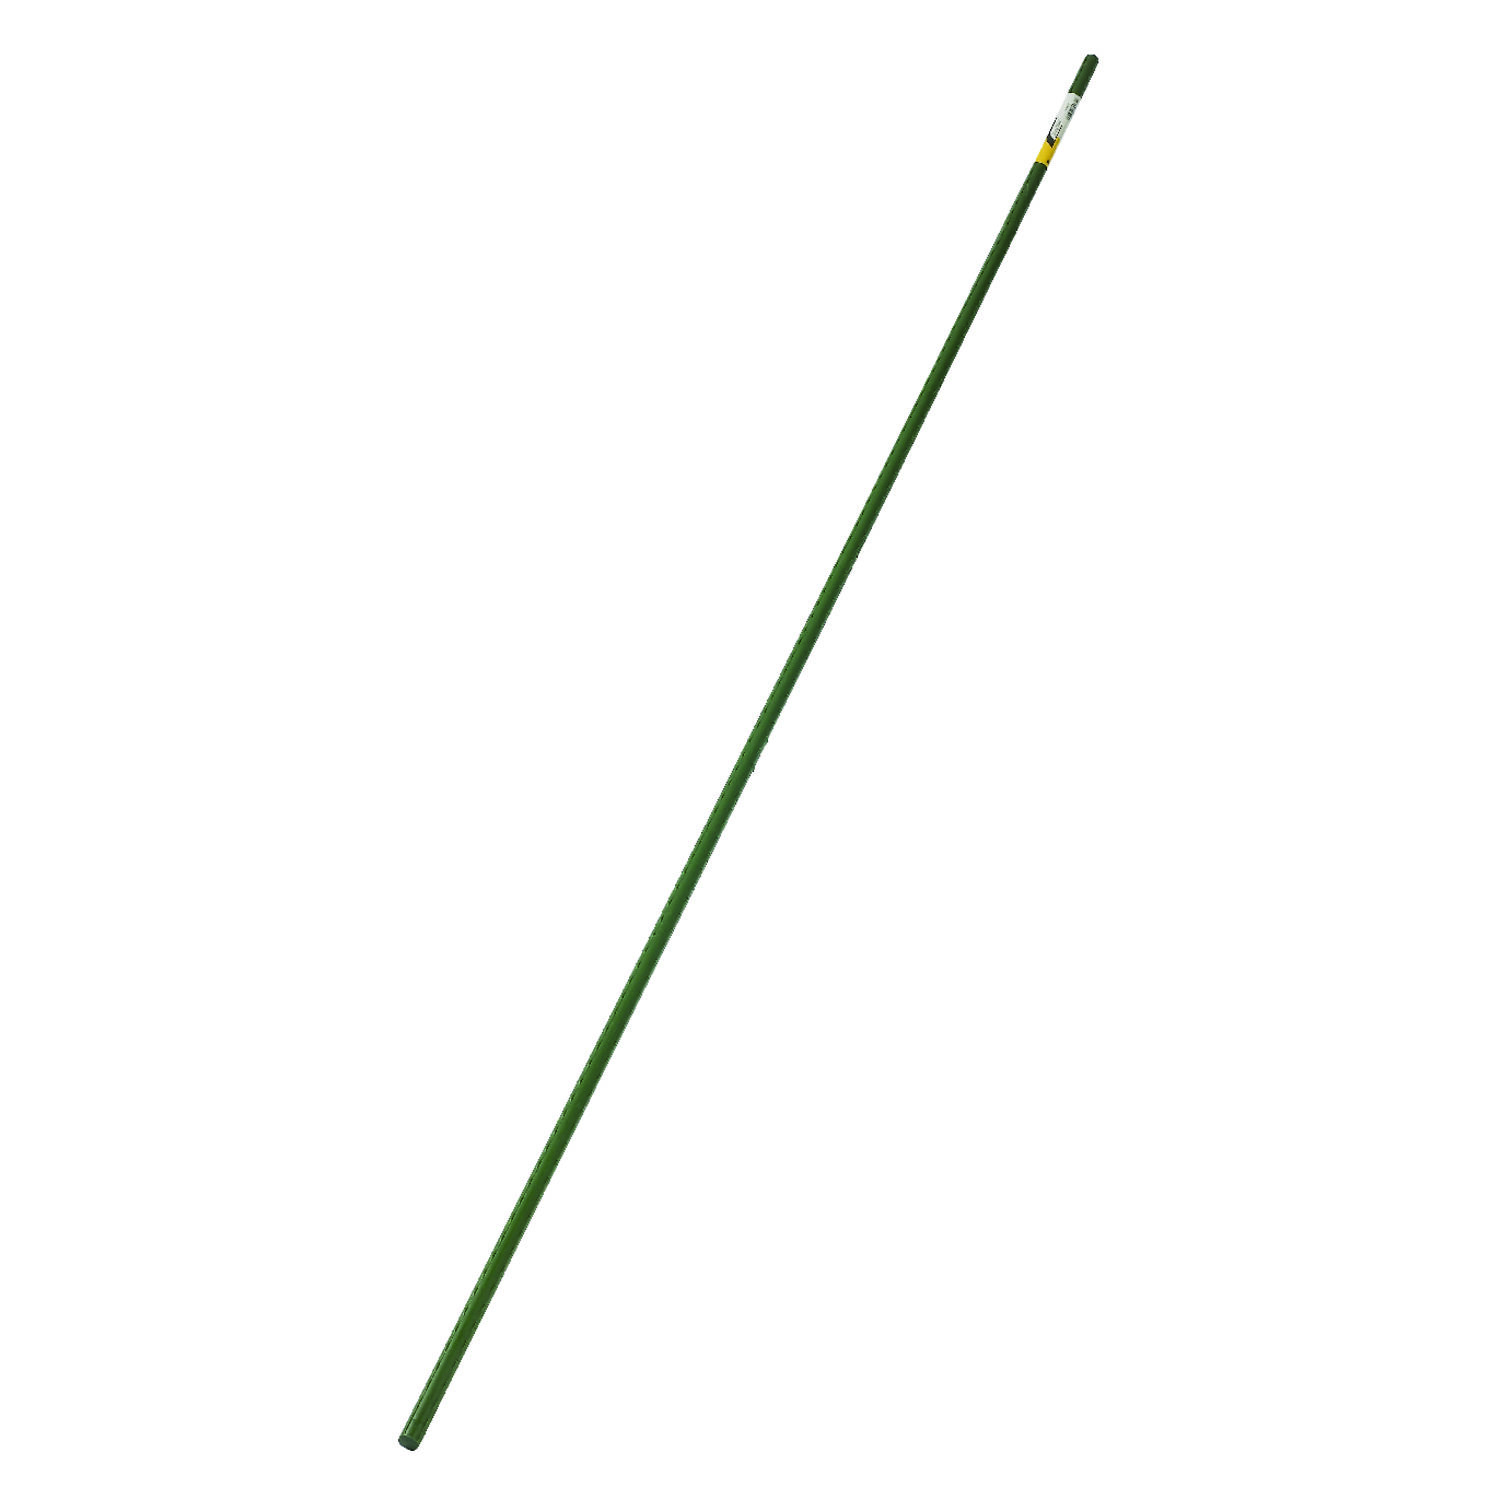 W L x 1-3/4 in Bond Manufacturing  Green  Bamboo  Garden Stakes  2 ft 